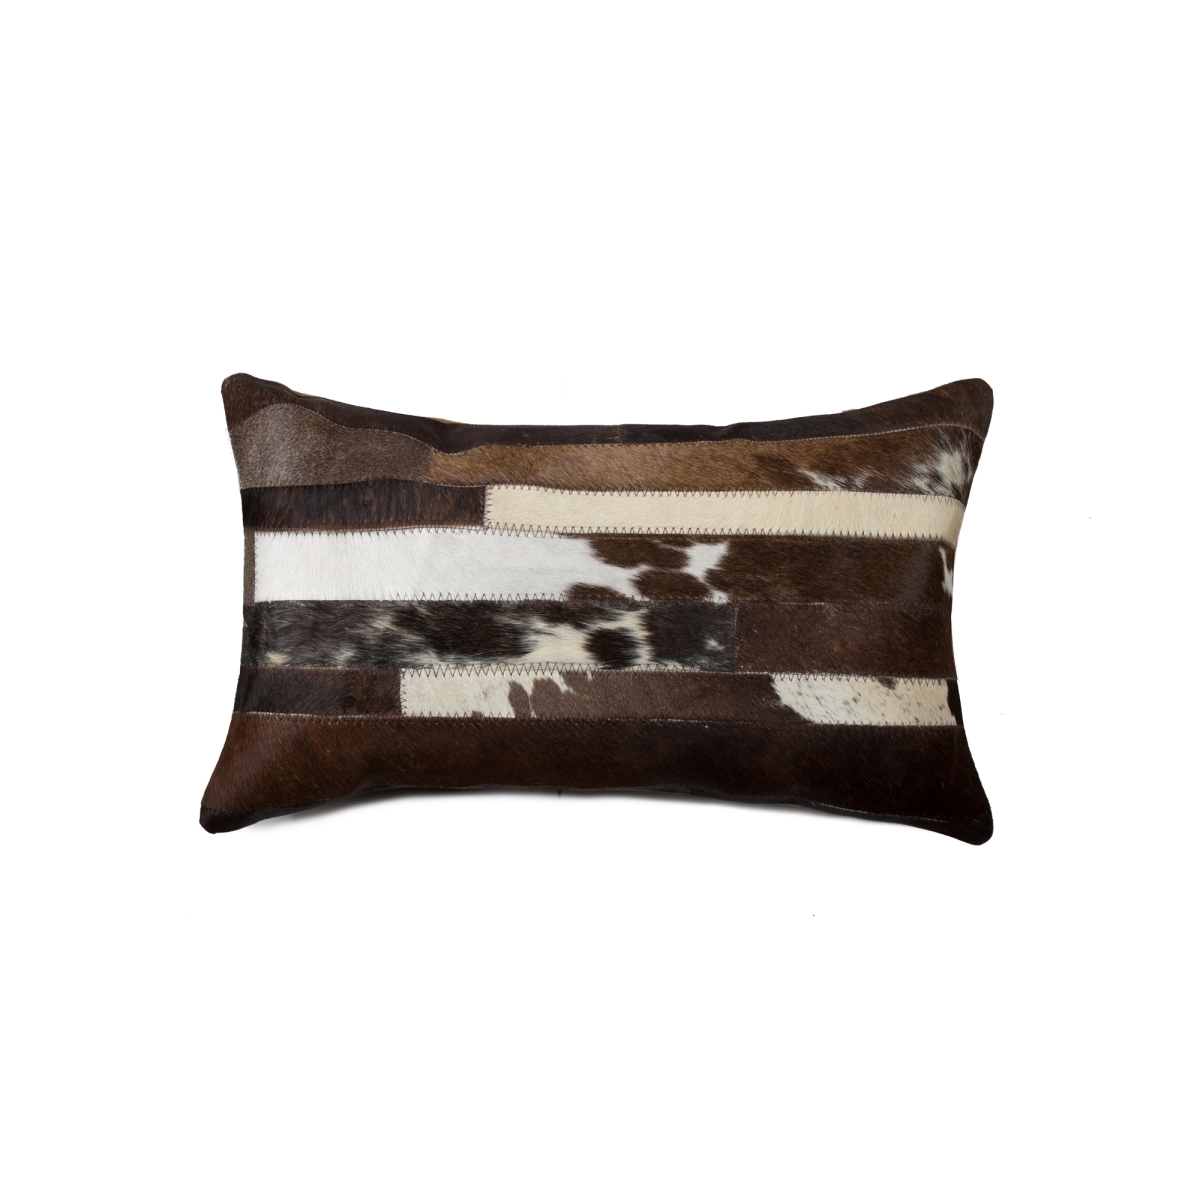 Picture of HomeRoots 317075 12 x 20 in. Cowhide Pillow - Chocolate & White